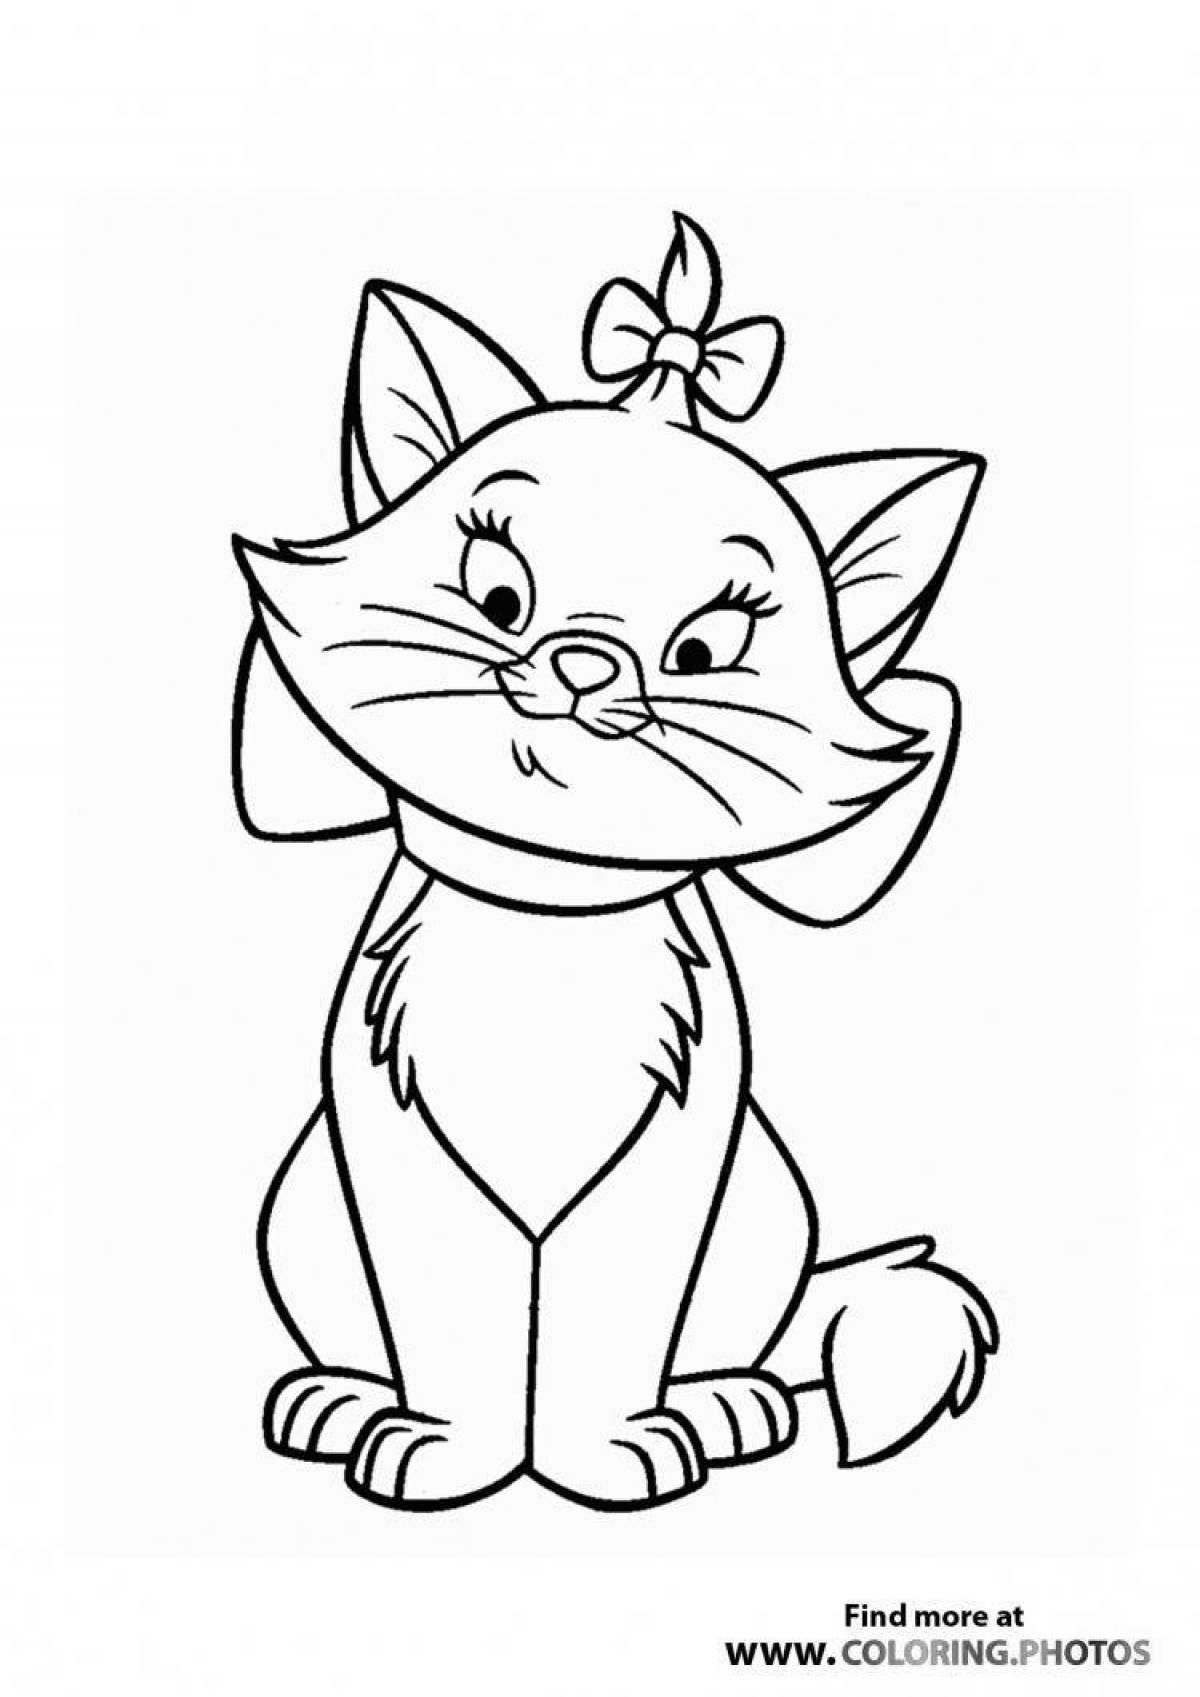 Adorable pussy coloring page